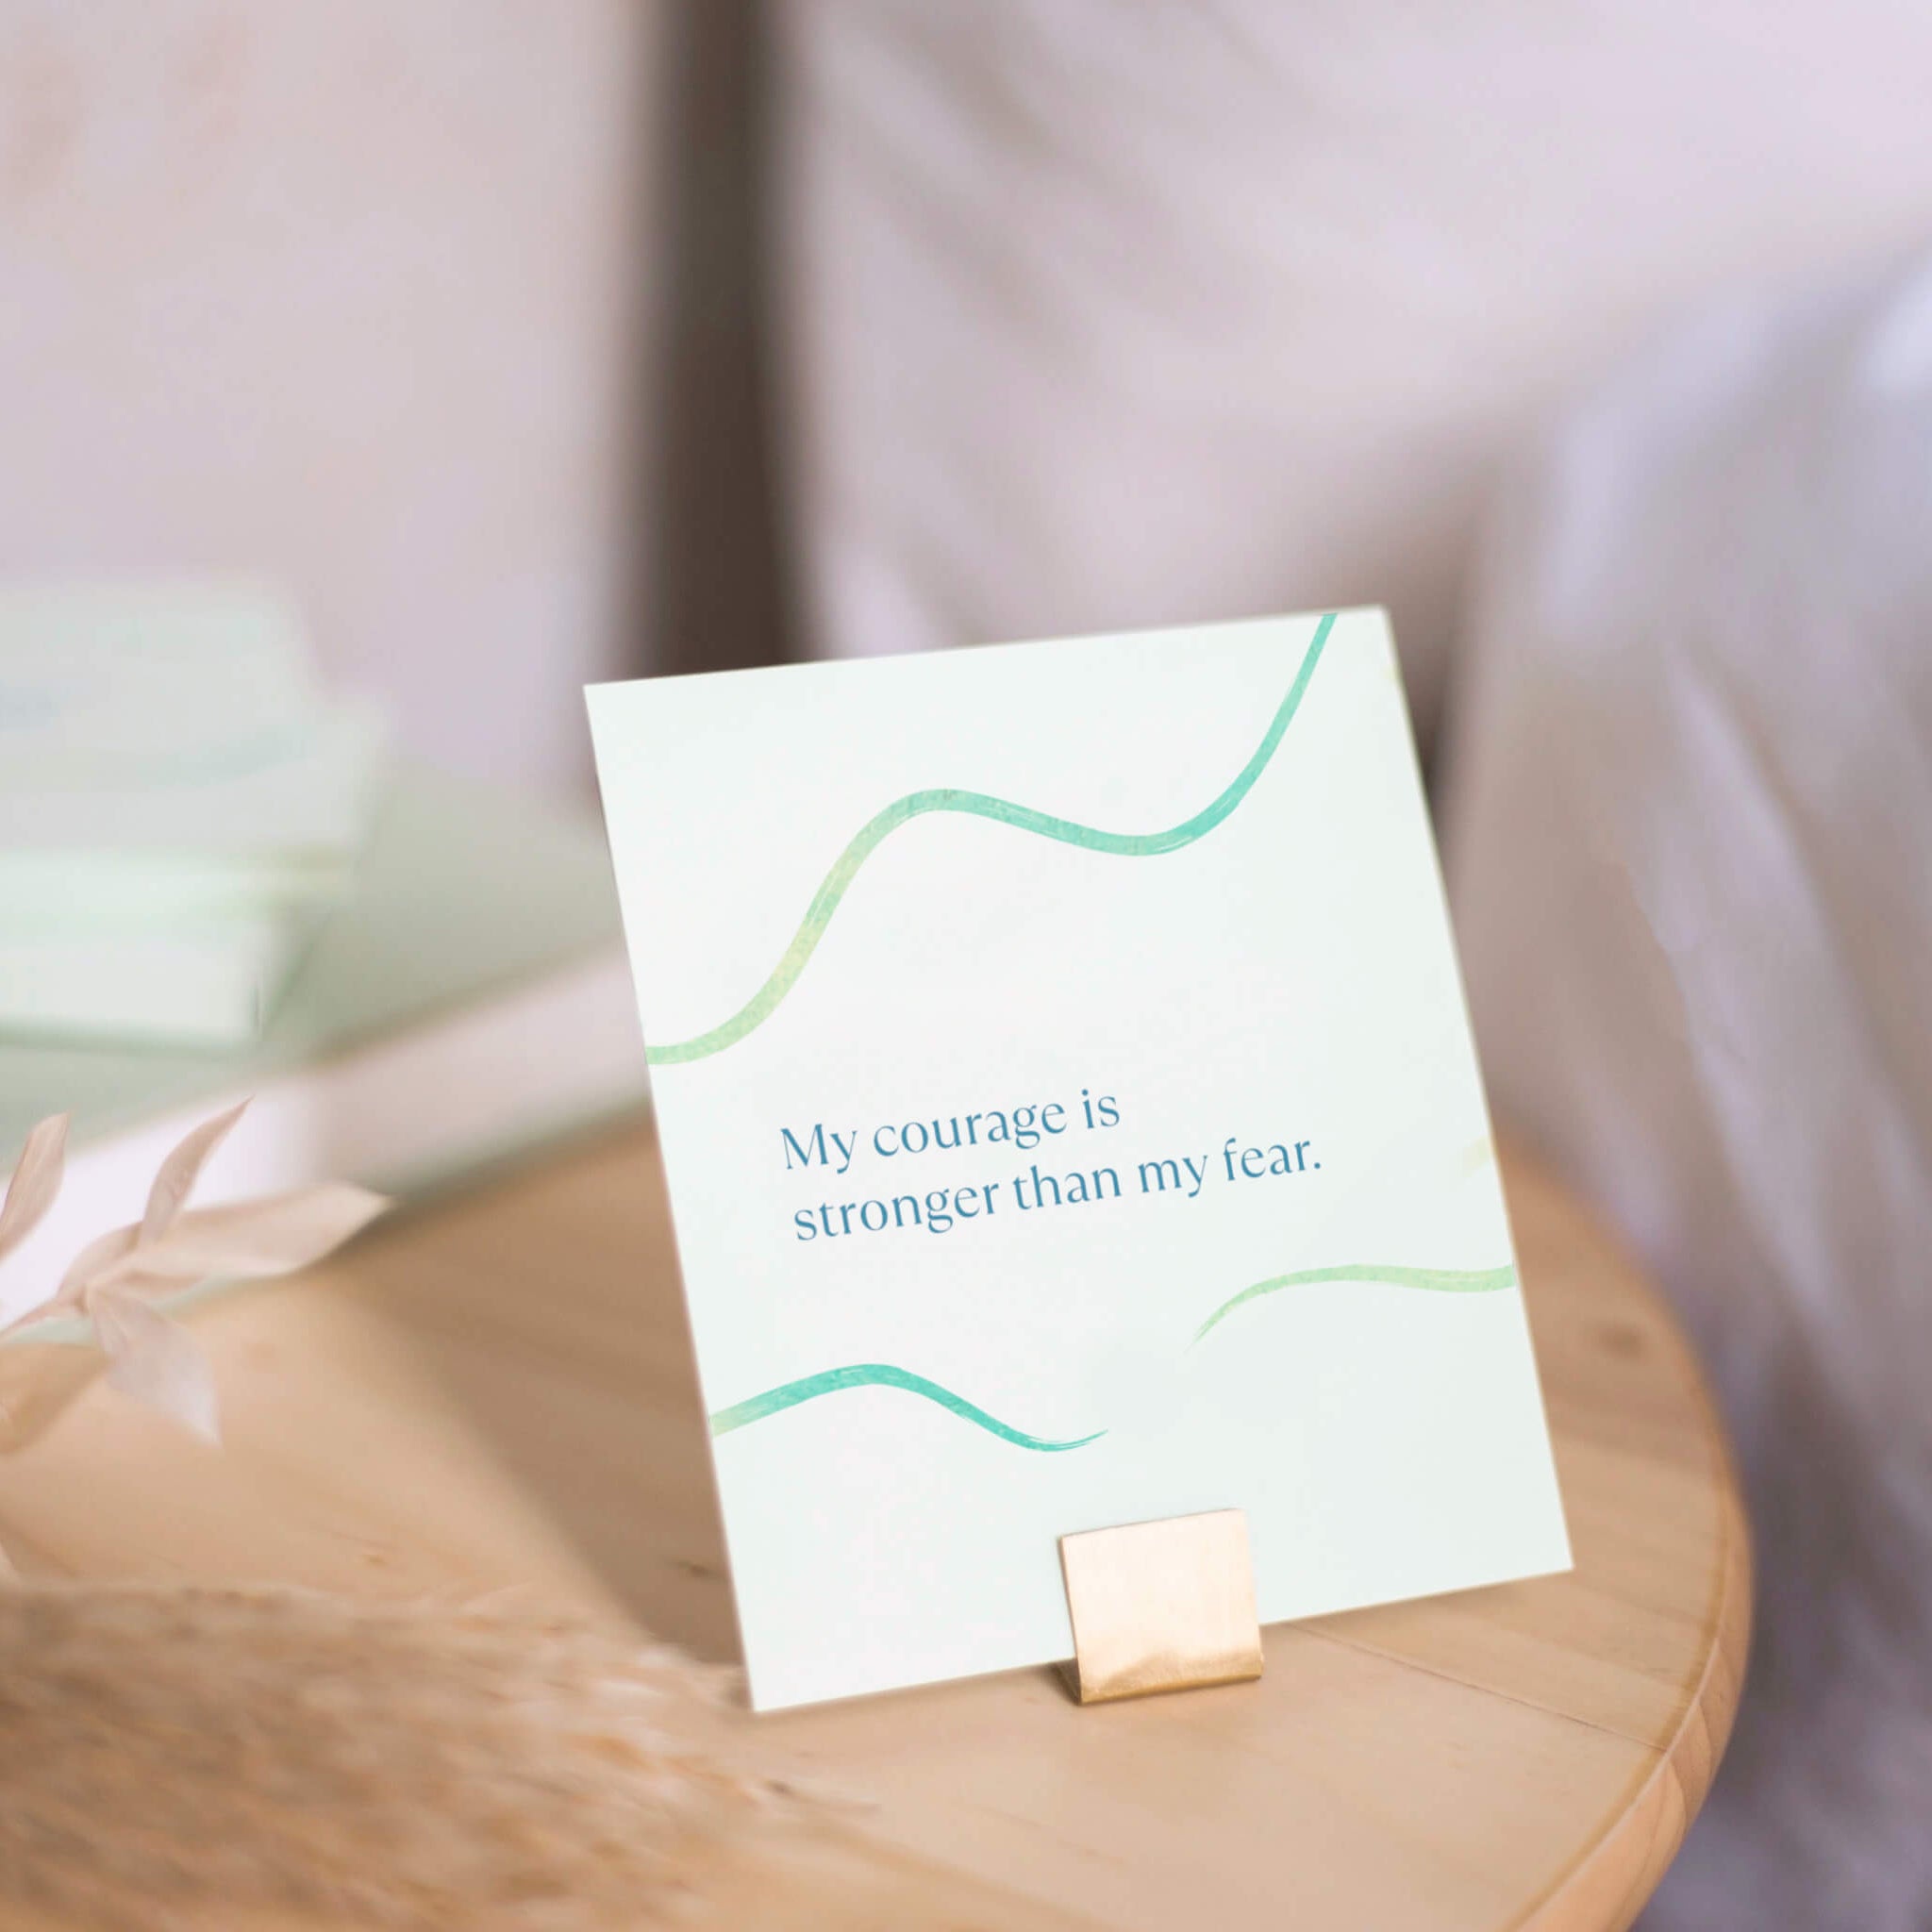 self-compassion affirmation card on stand